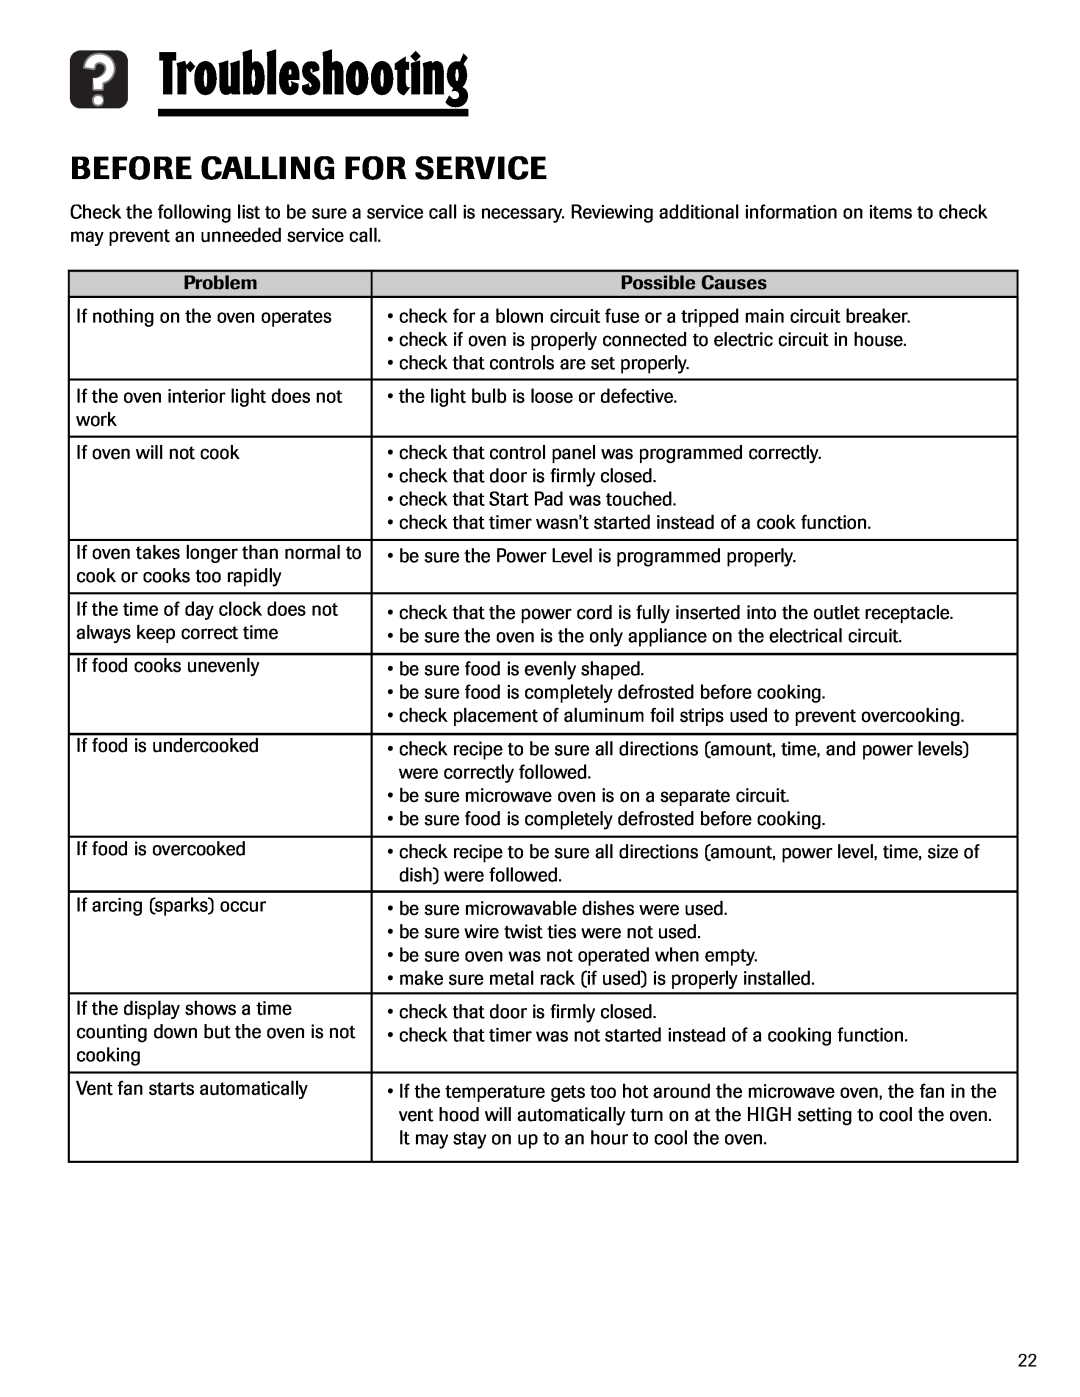 Maytag UMV1152BA important safety instructions Troubleshooting, Before Calling For Service 